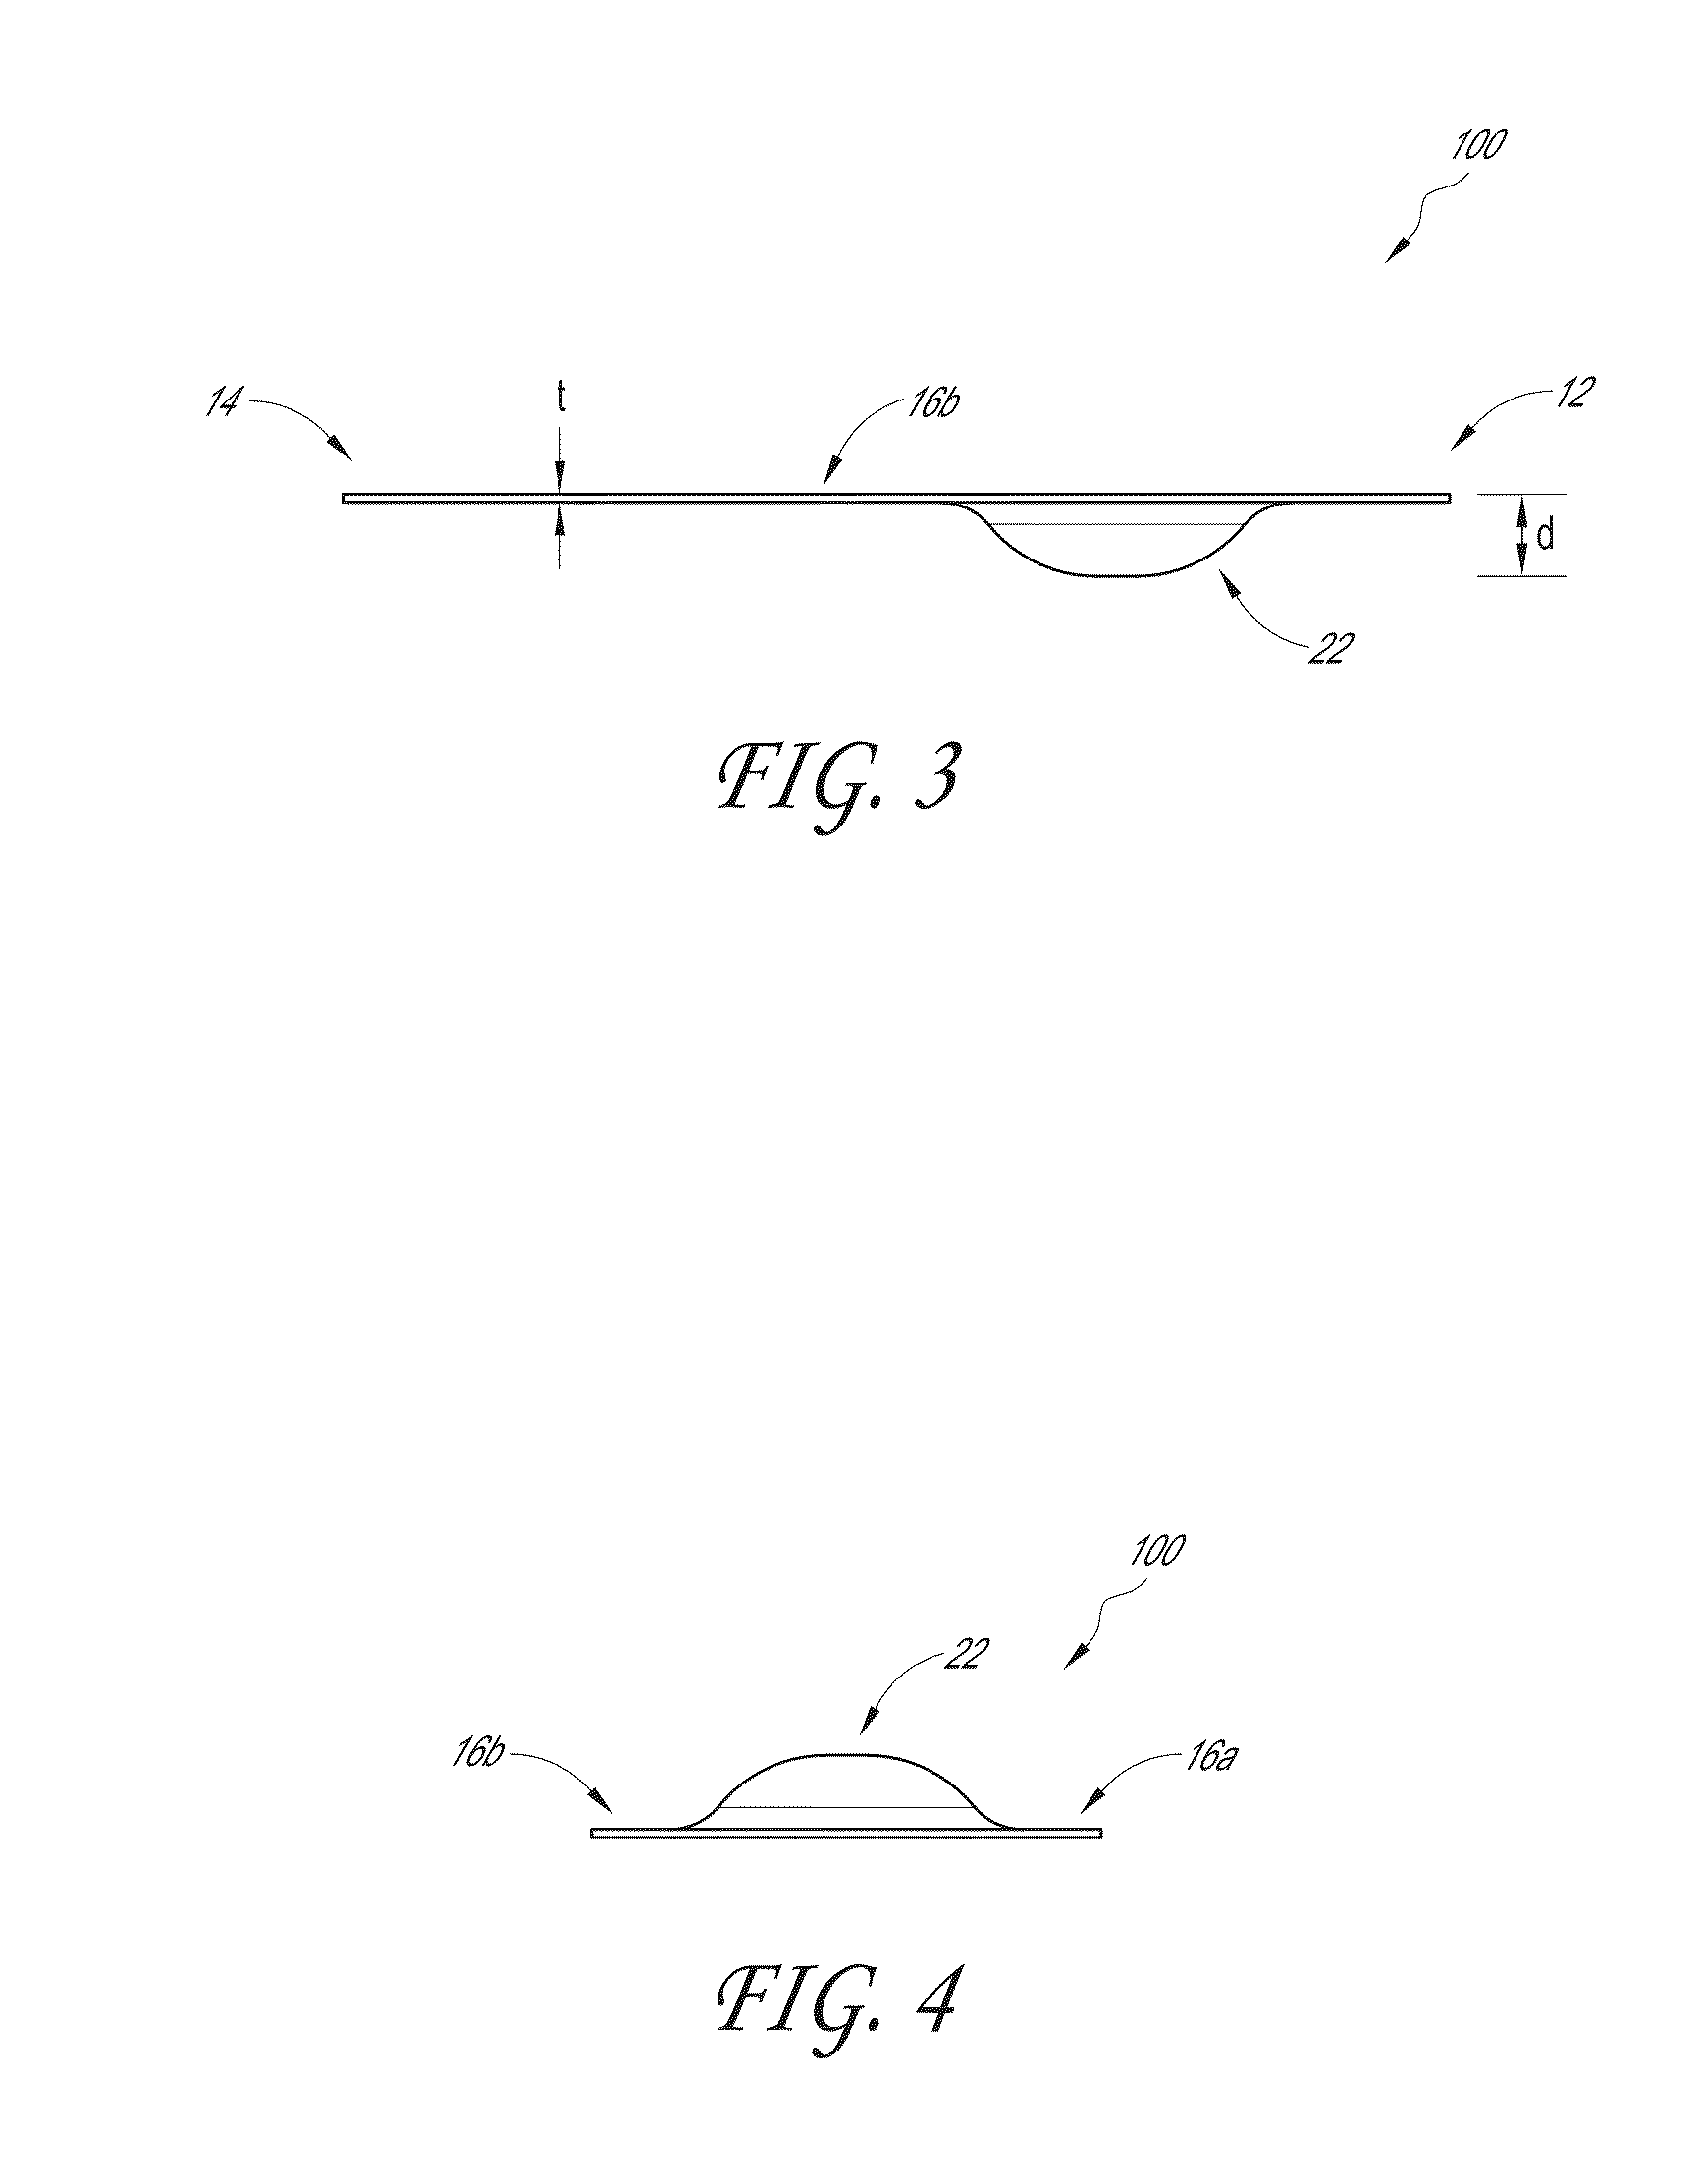 Neck, spine, and spinal cord support device for newborn baby and infant, and blanket assembly for same